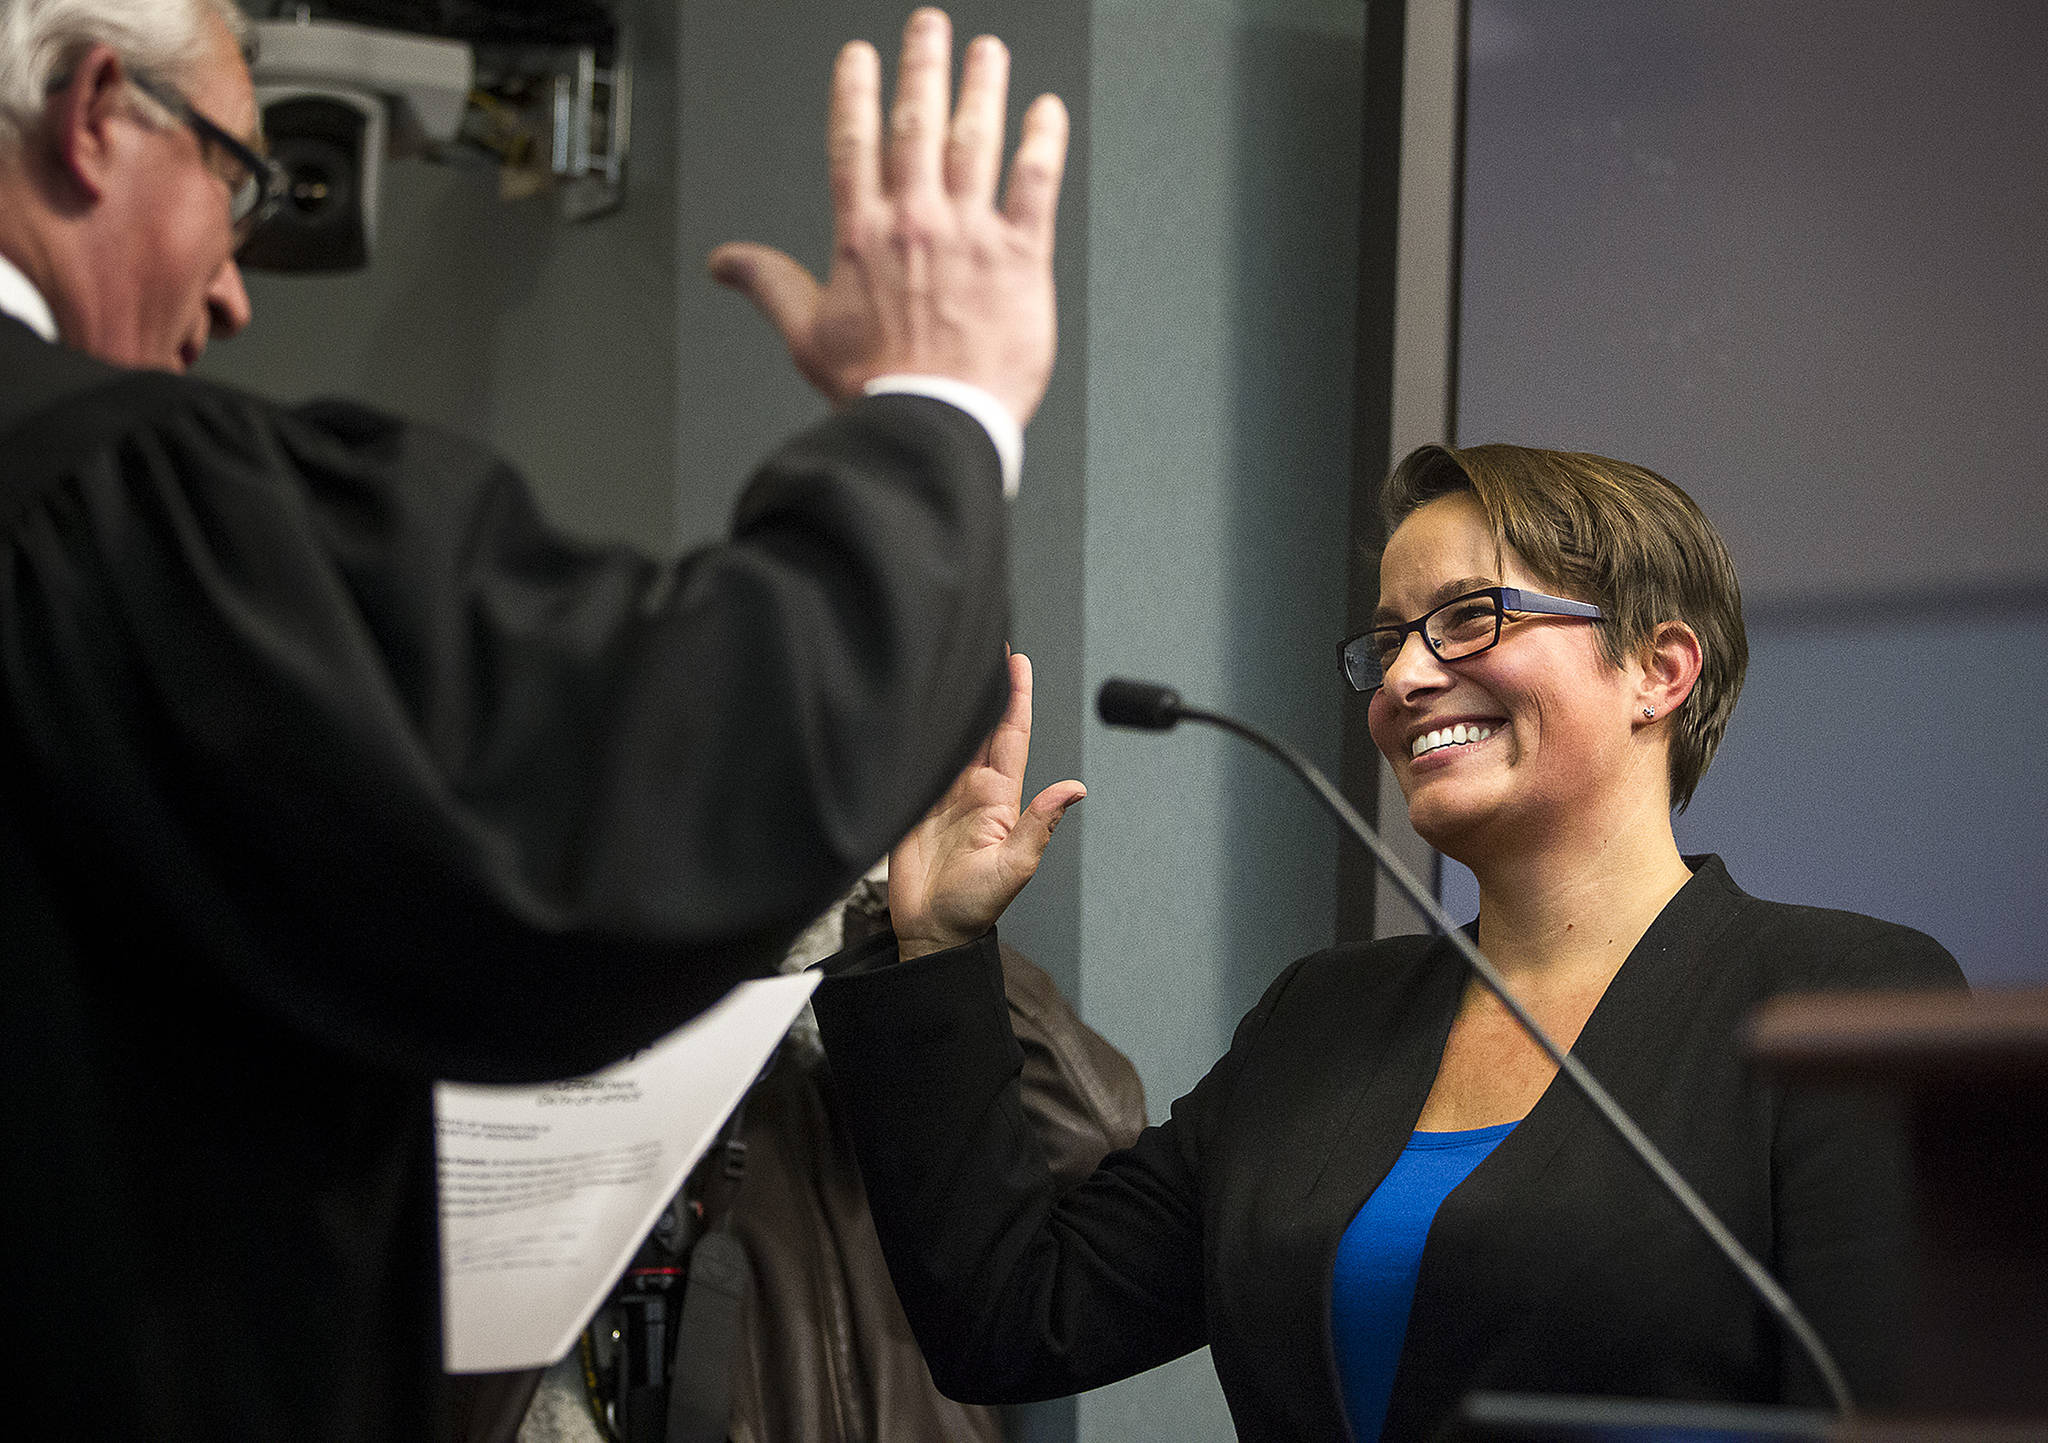 Cassie Franklin is sworn in as the Mayor of Everett by Snohomish County Superior Court Judge Joseph Wilson before a City Council meeting on Wednesday. (Ian Terry / The Herald)